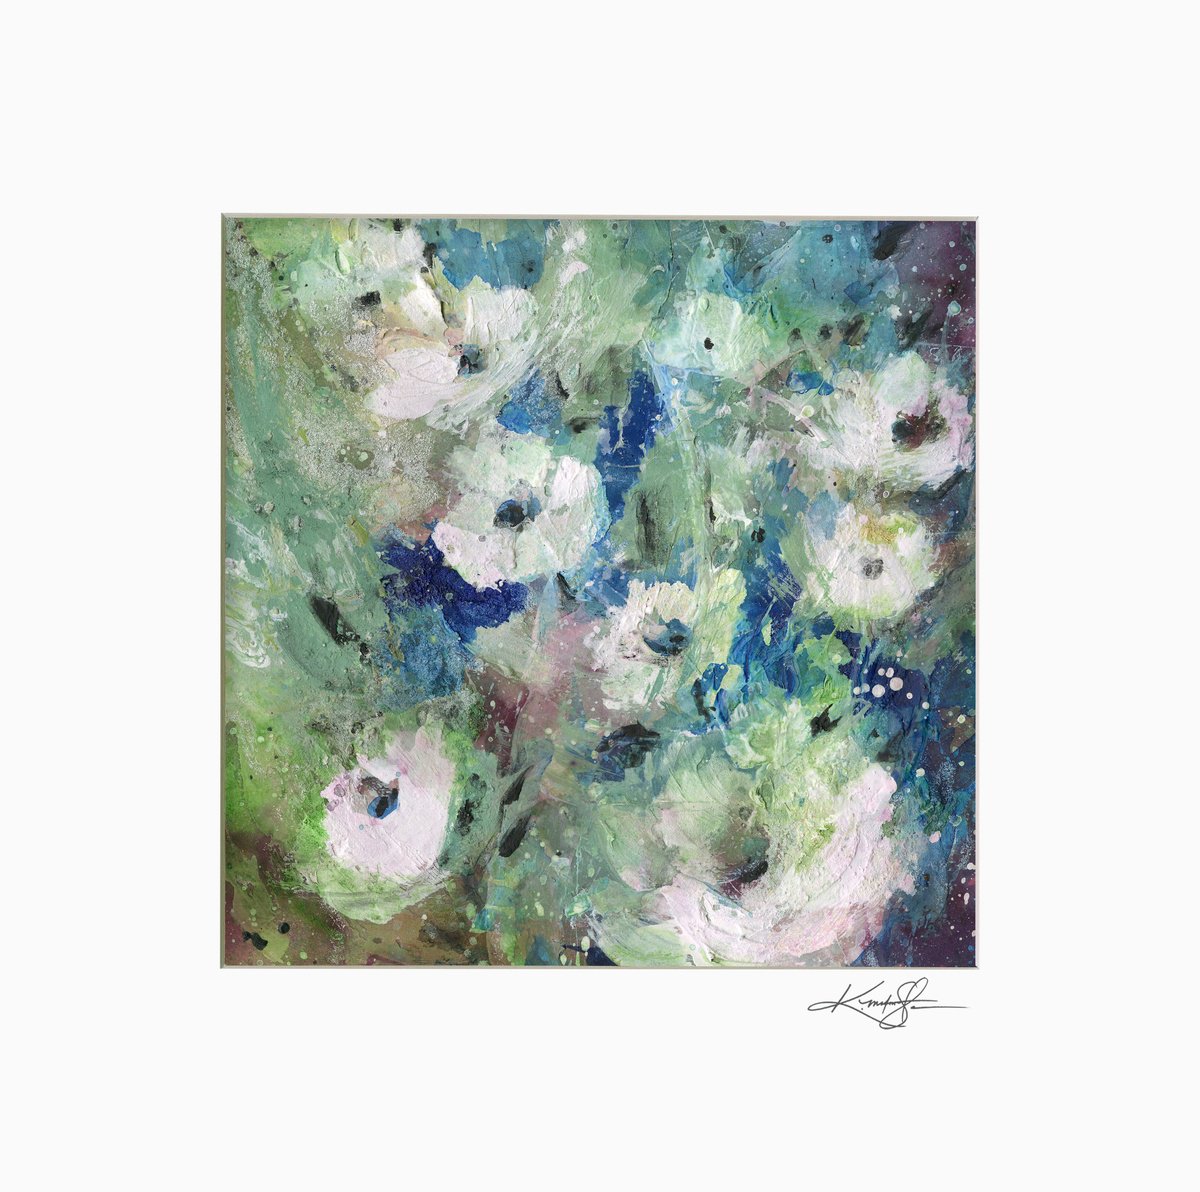 Floral Delight 65 - Textured Floral Abstract Painting by Kathy Morton Stanion by Kathy Morton Stanion